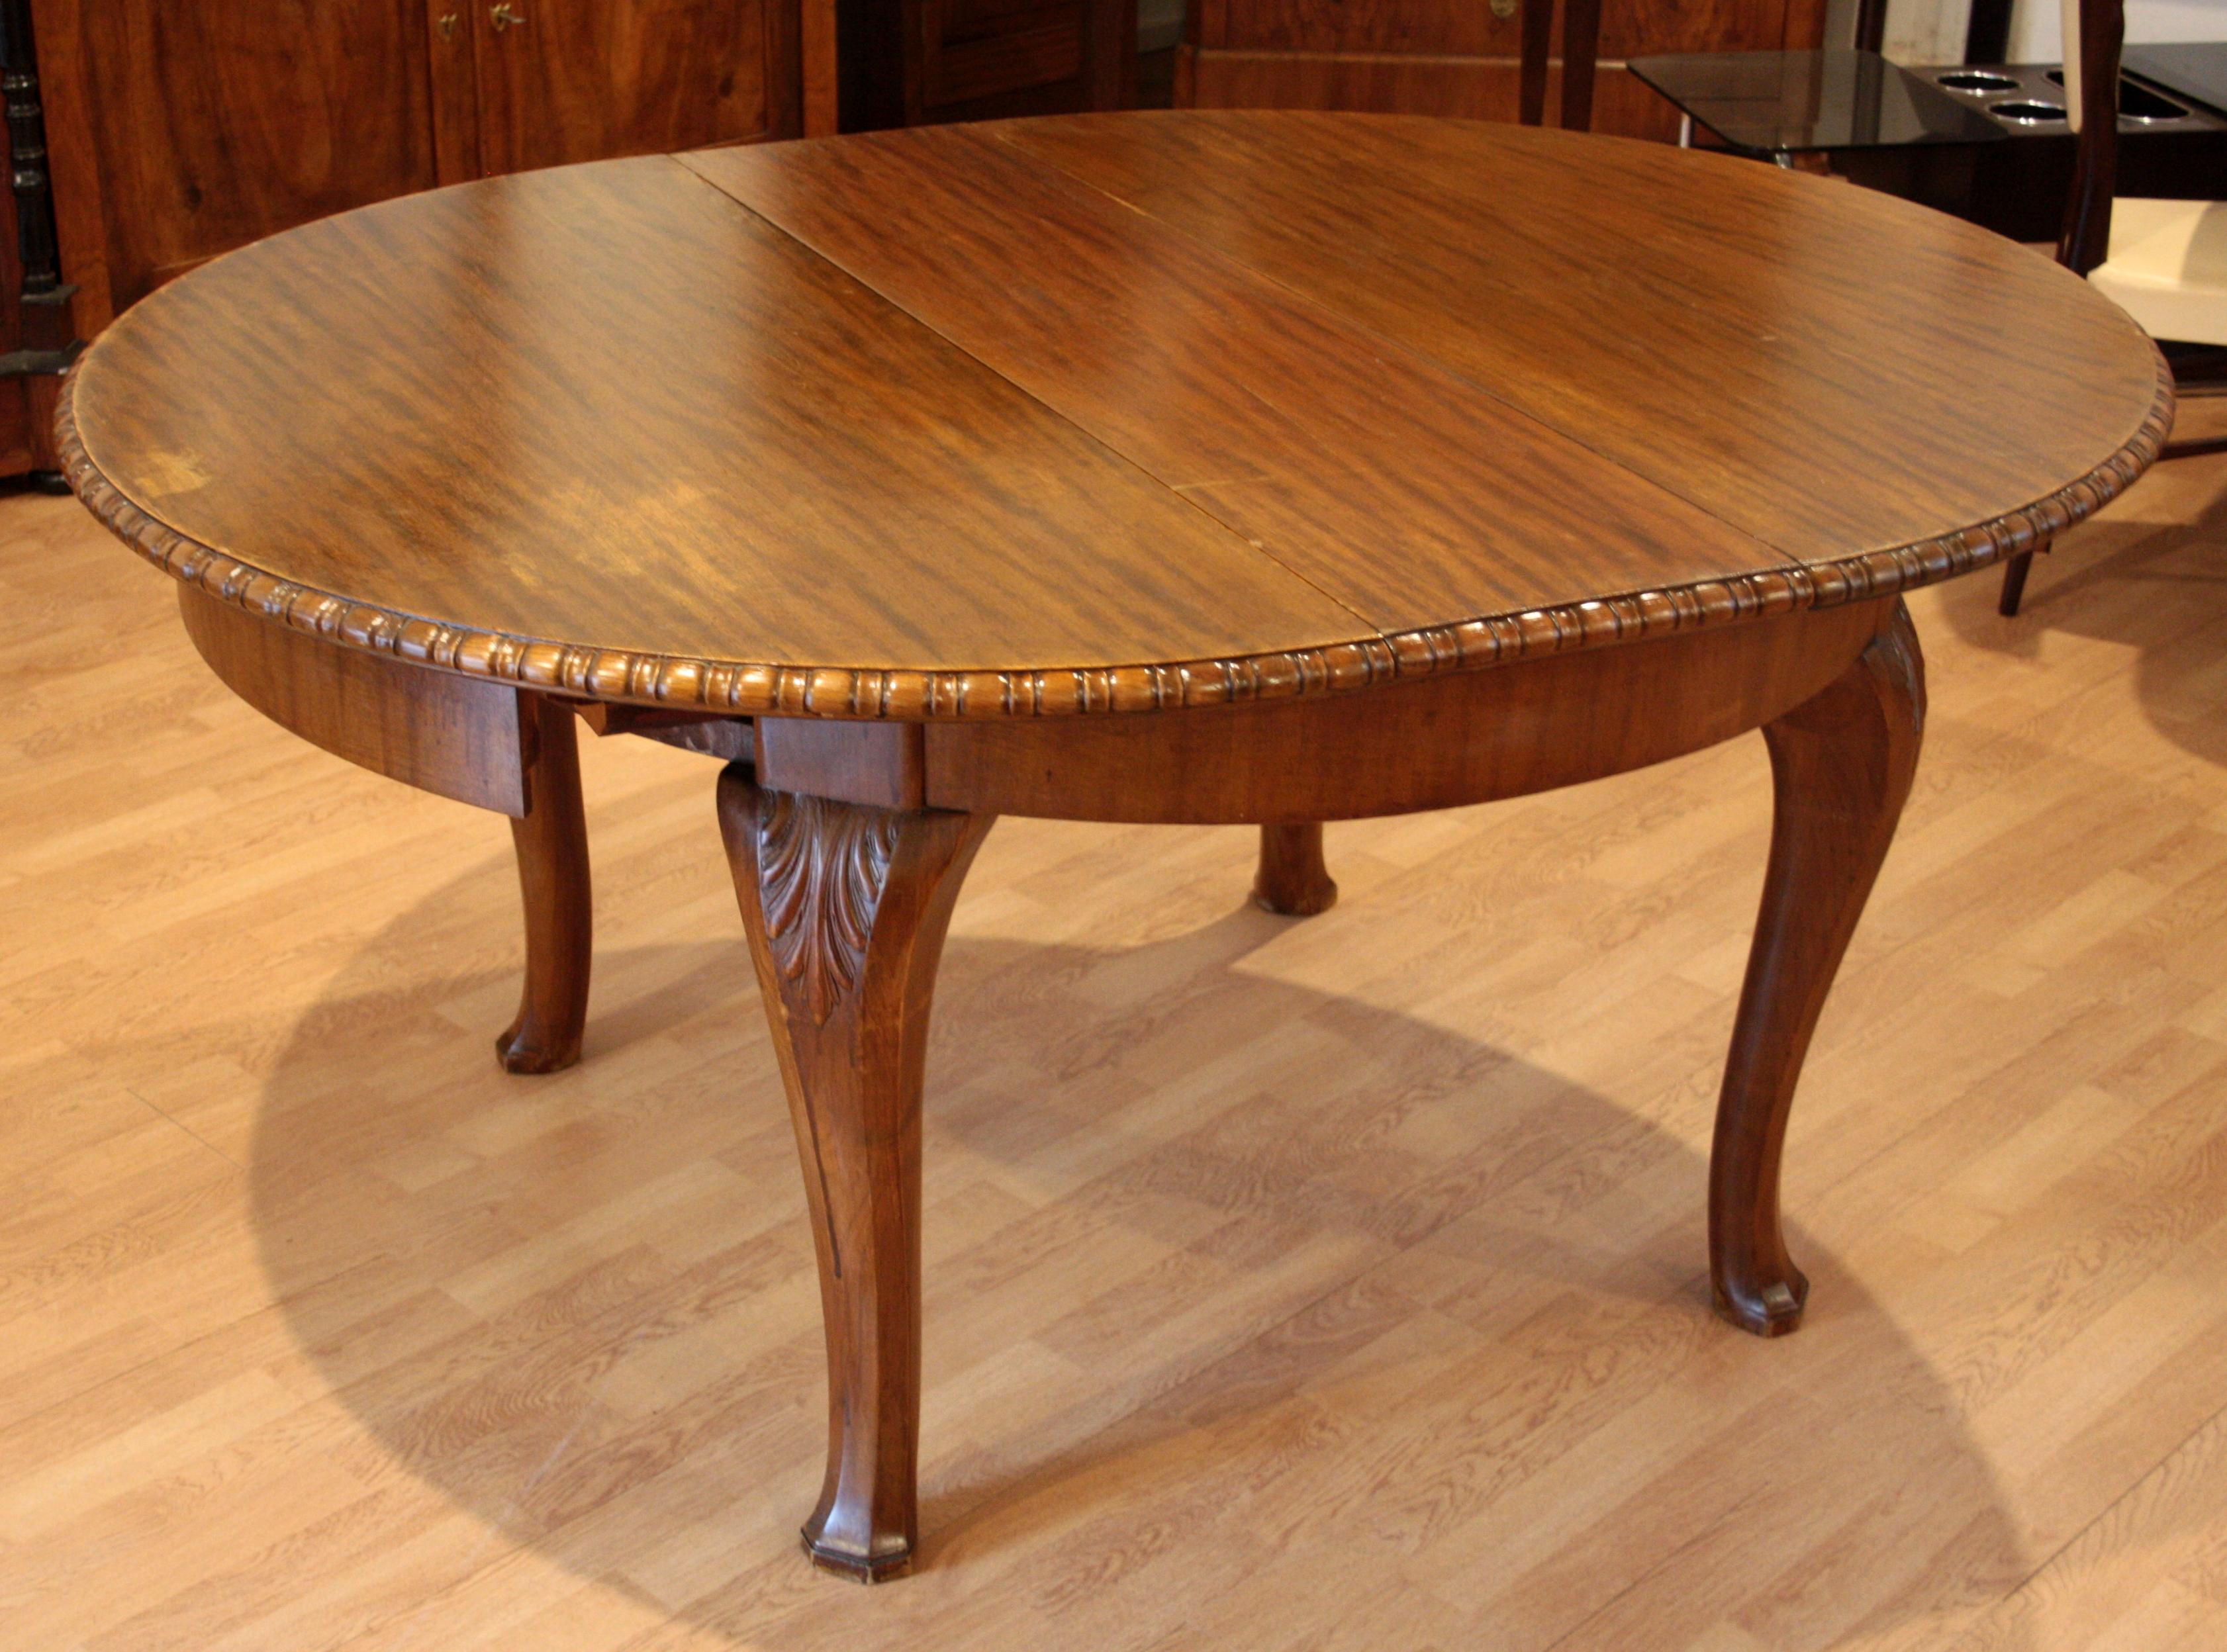 Neoclassical Revival Vintage Oak Extendable Solid Table Classical Italian Quality 160 x 130 cm opened For Sale